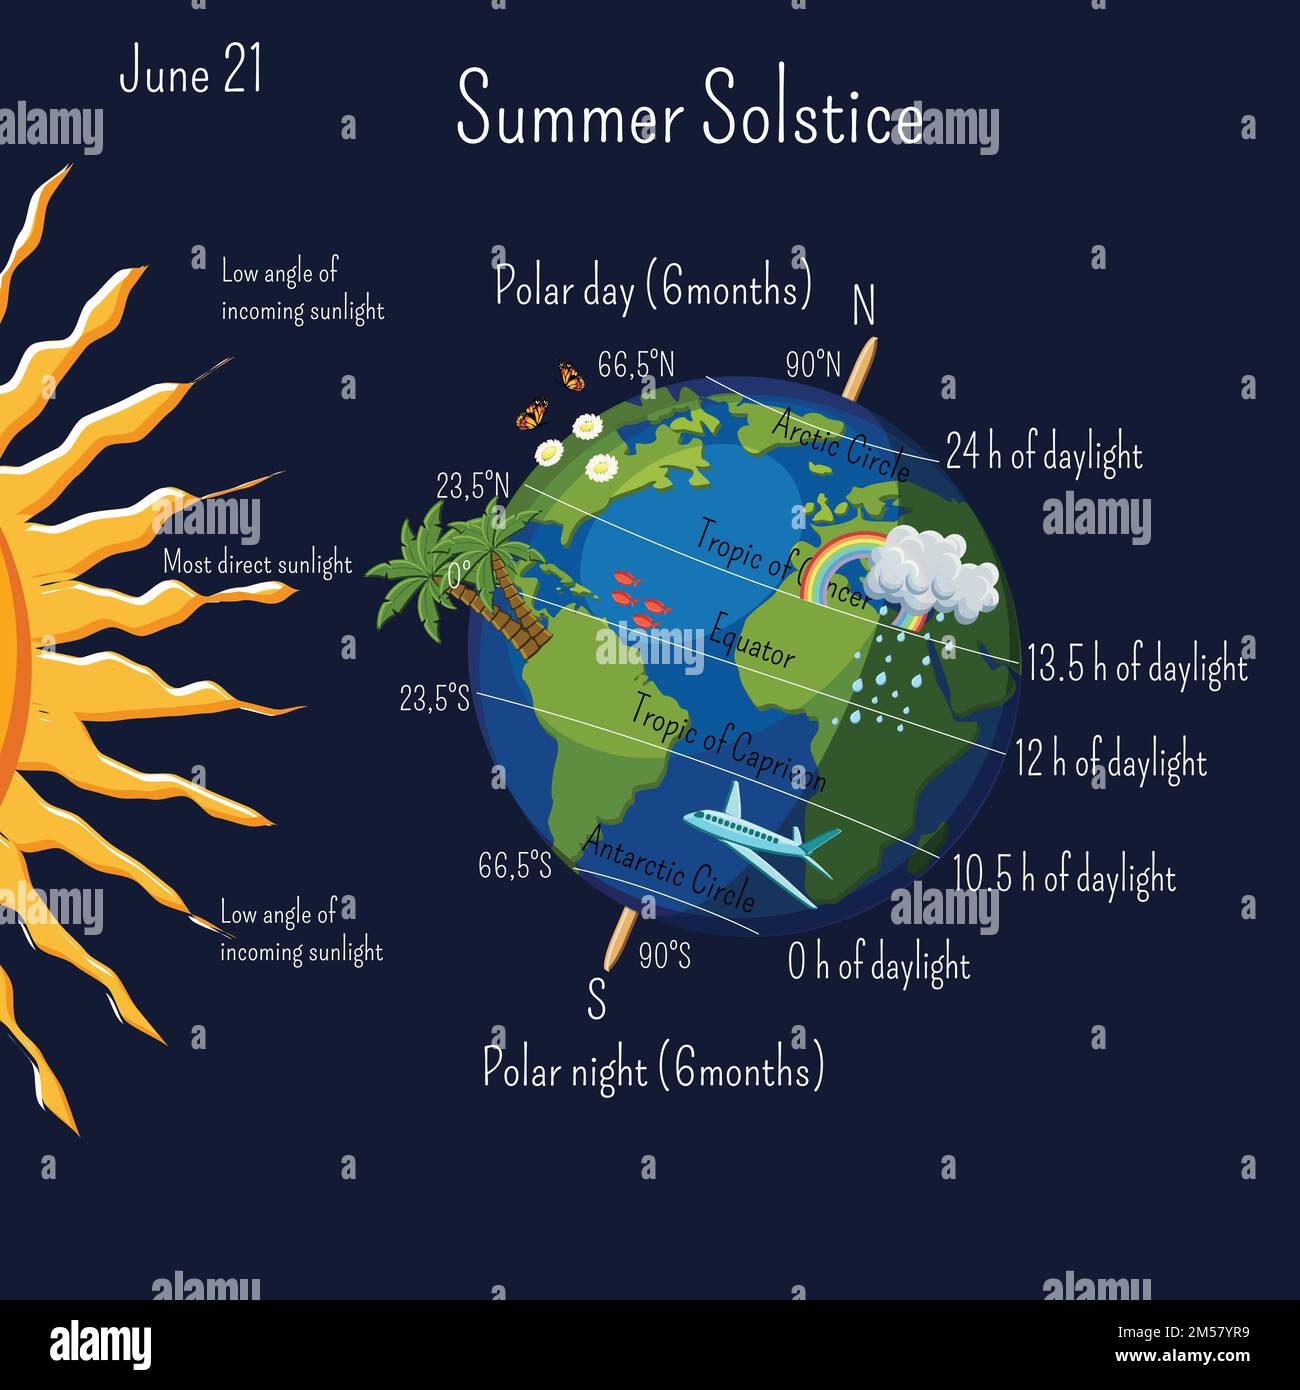 Summer solstice June 21 infographic with climate zones and day duration, and some cartoon summer symbols on the planet Earth. Science for kids. Cartoo Stock Vector